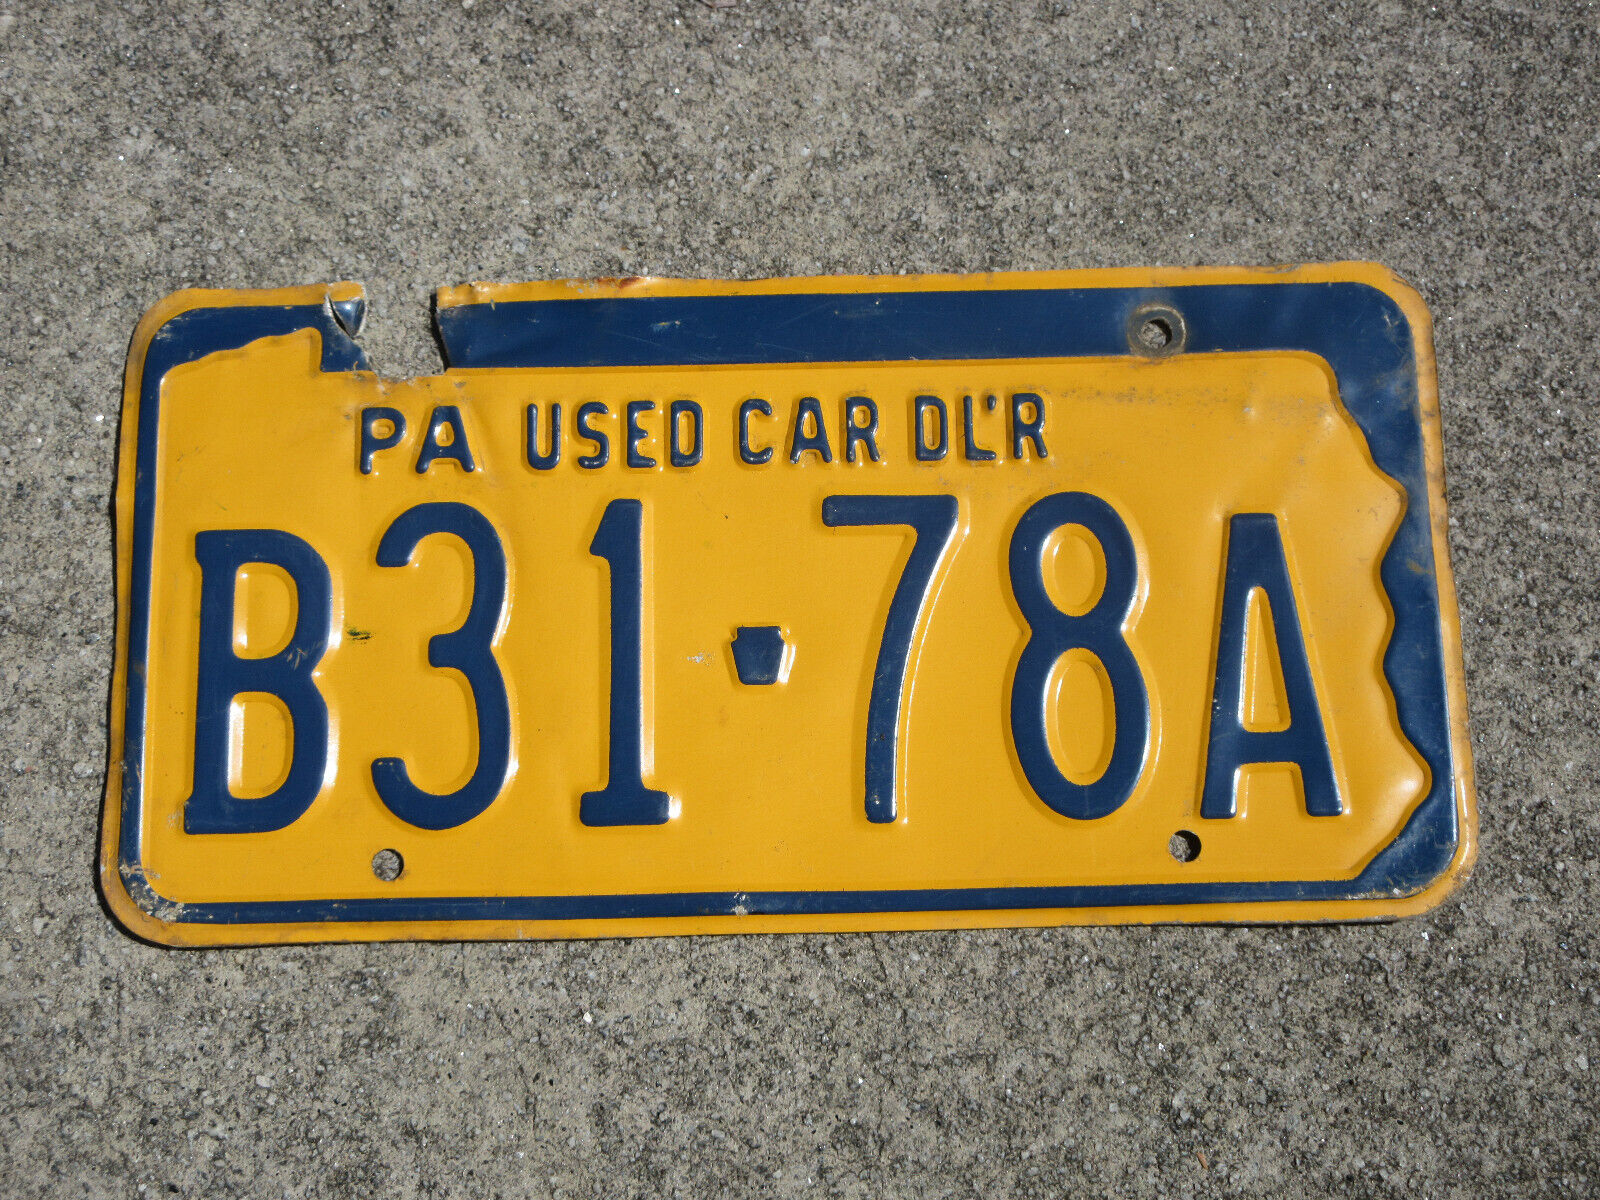 1965 Pennsylvania Used Car Dealer License Plate Pa Penna Ford Chevrolet B3178a